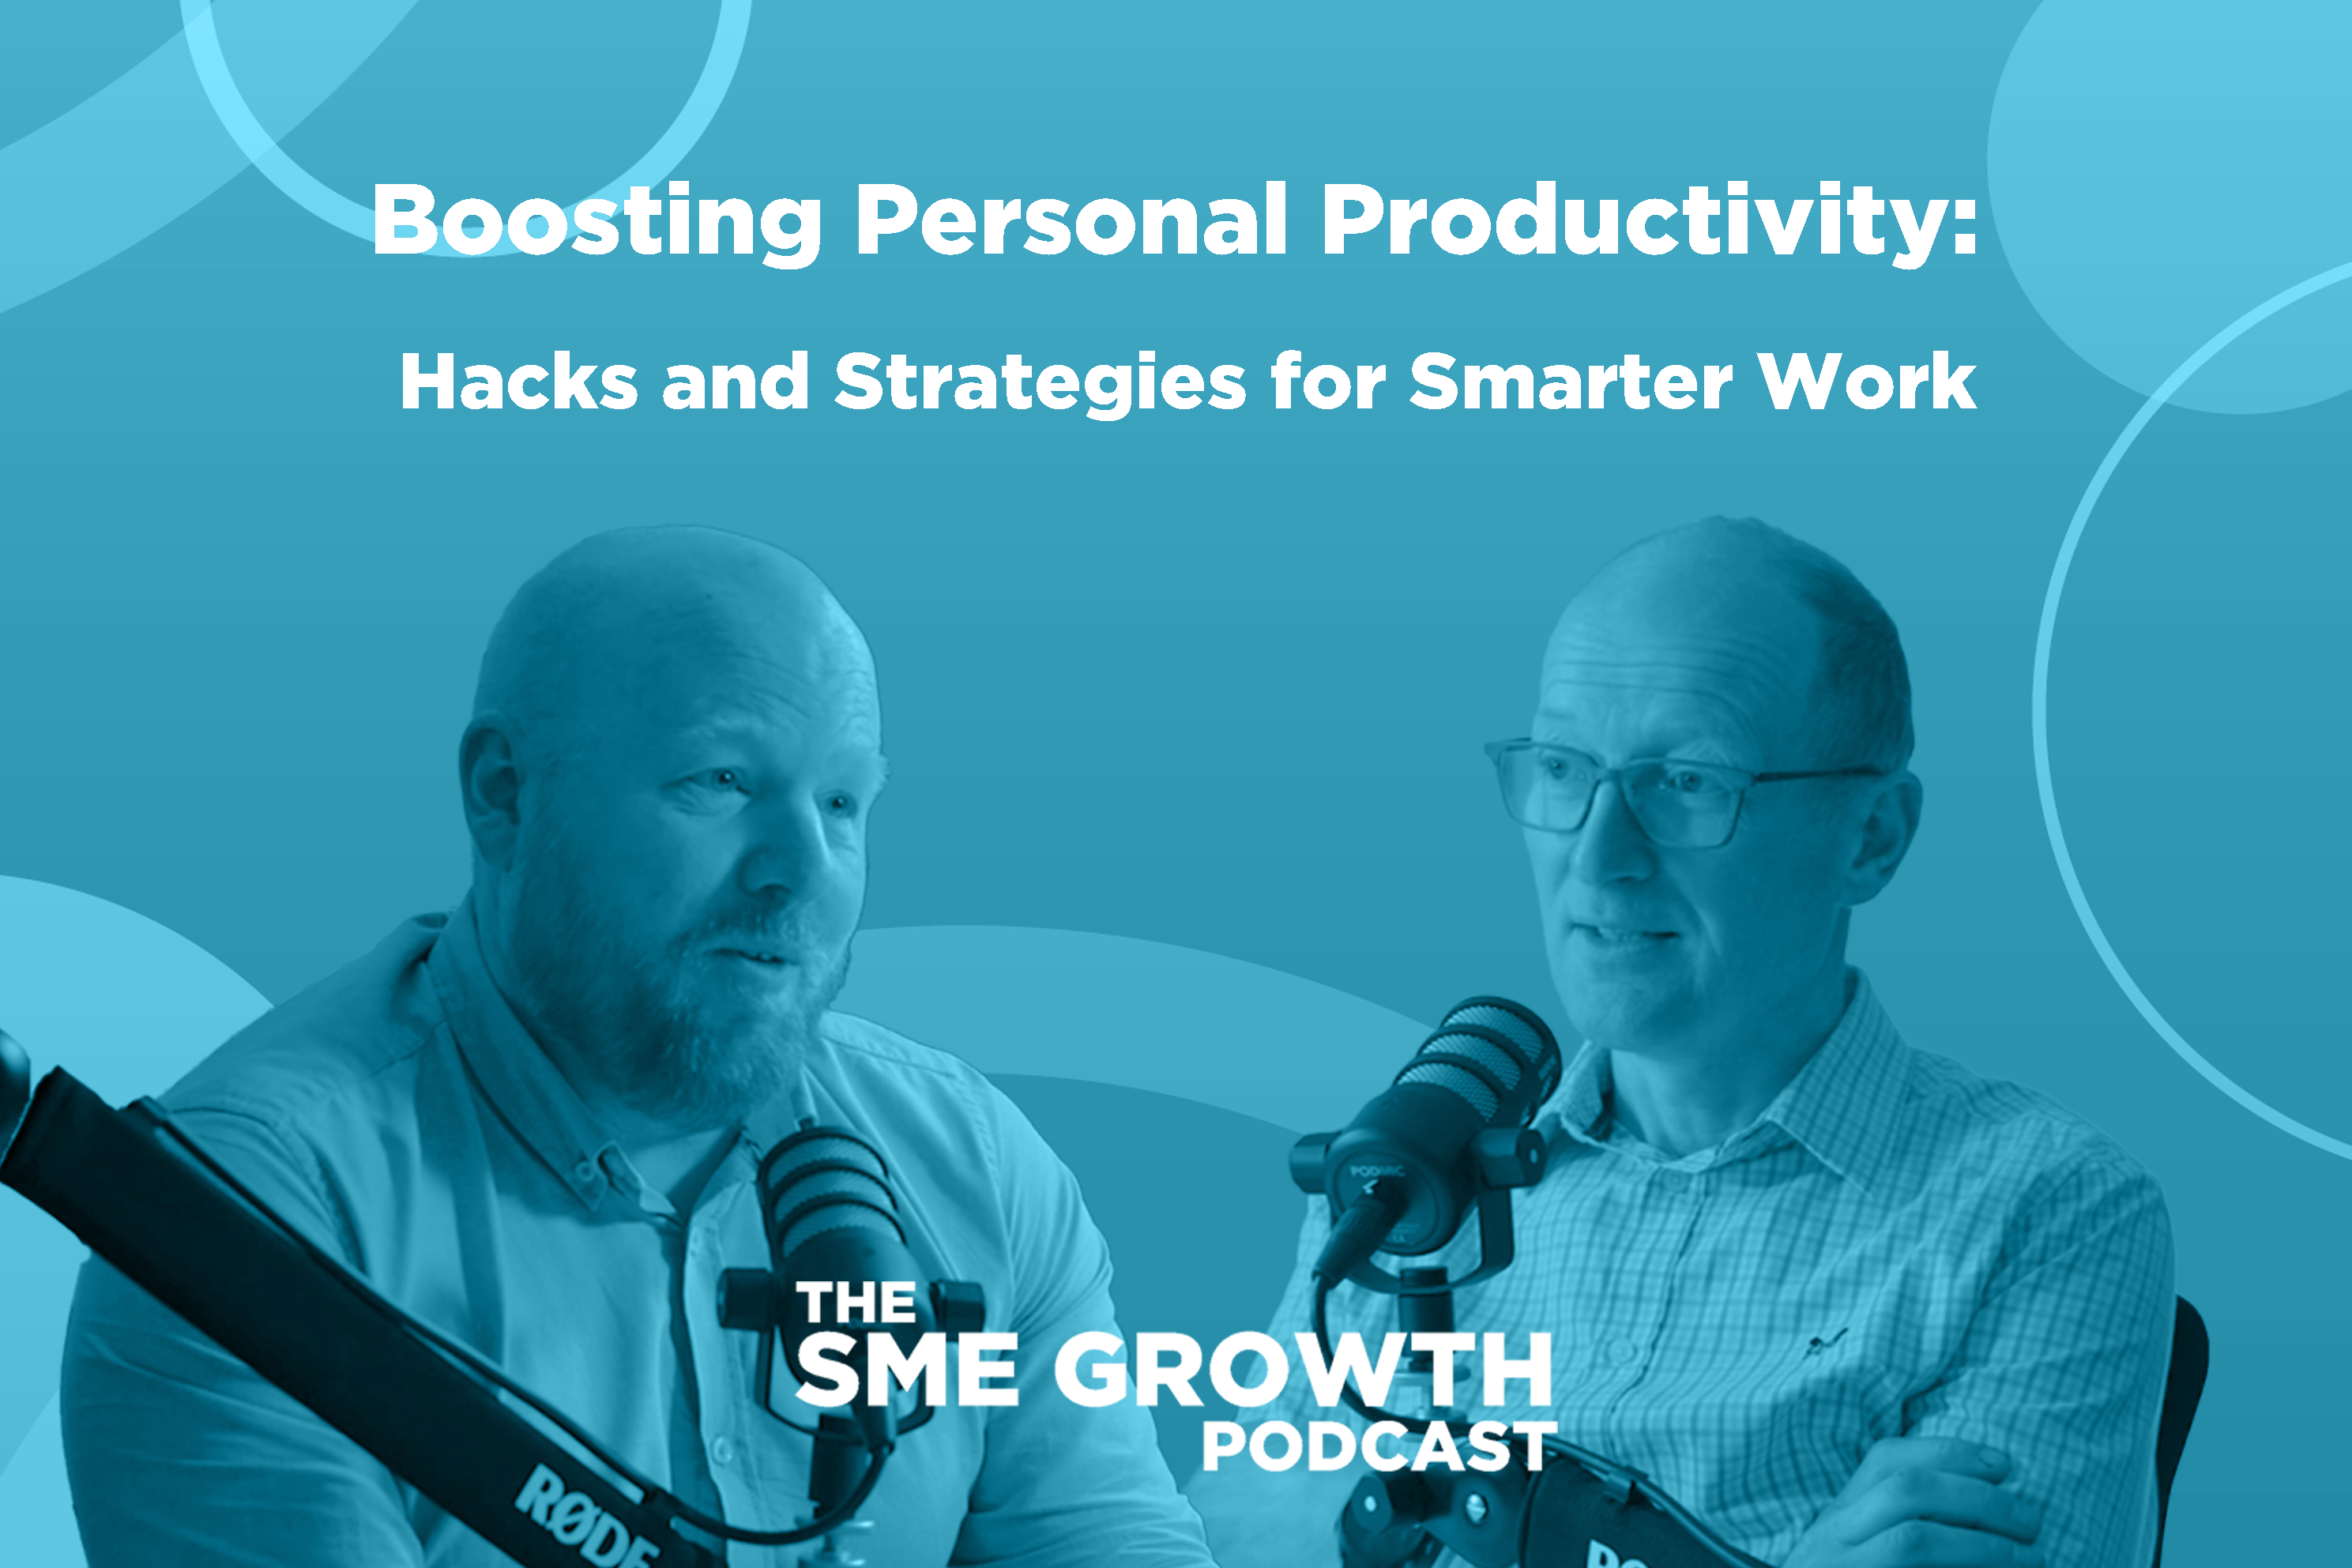 Boosting personal productivity: hacks and strategies for success, The SME Growth podcast. Blue banner with two males speaking into microphones.